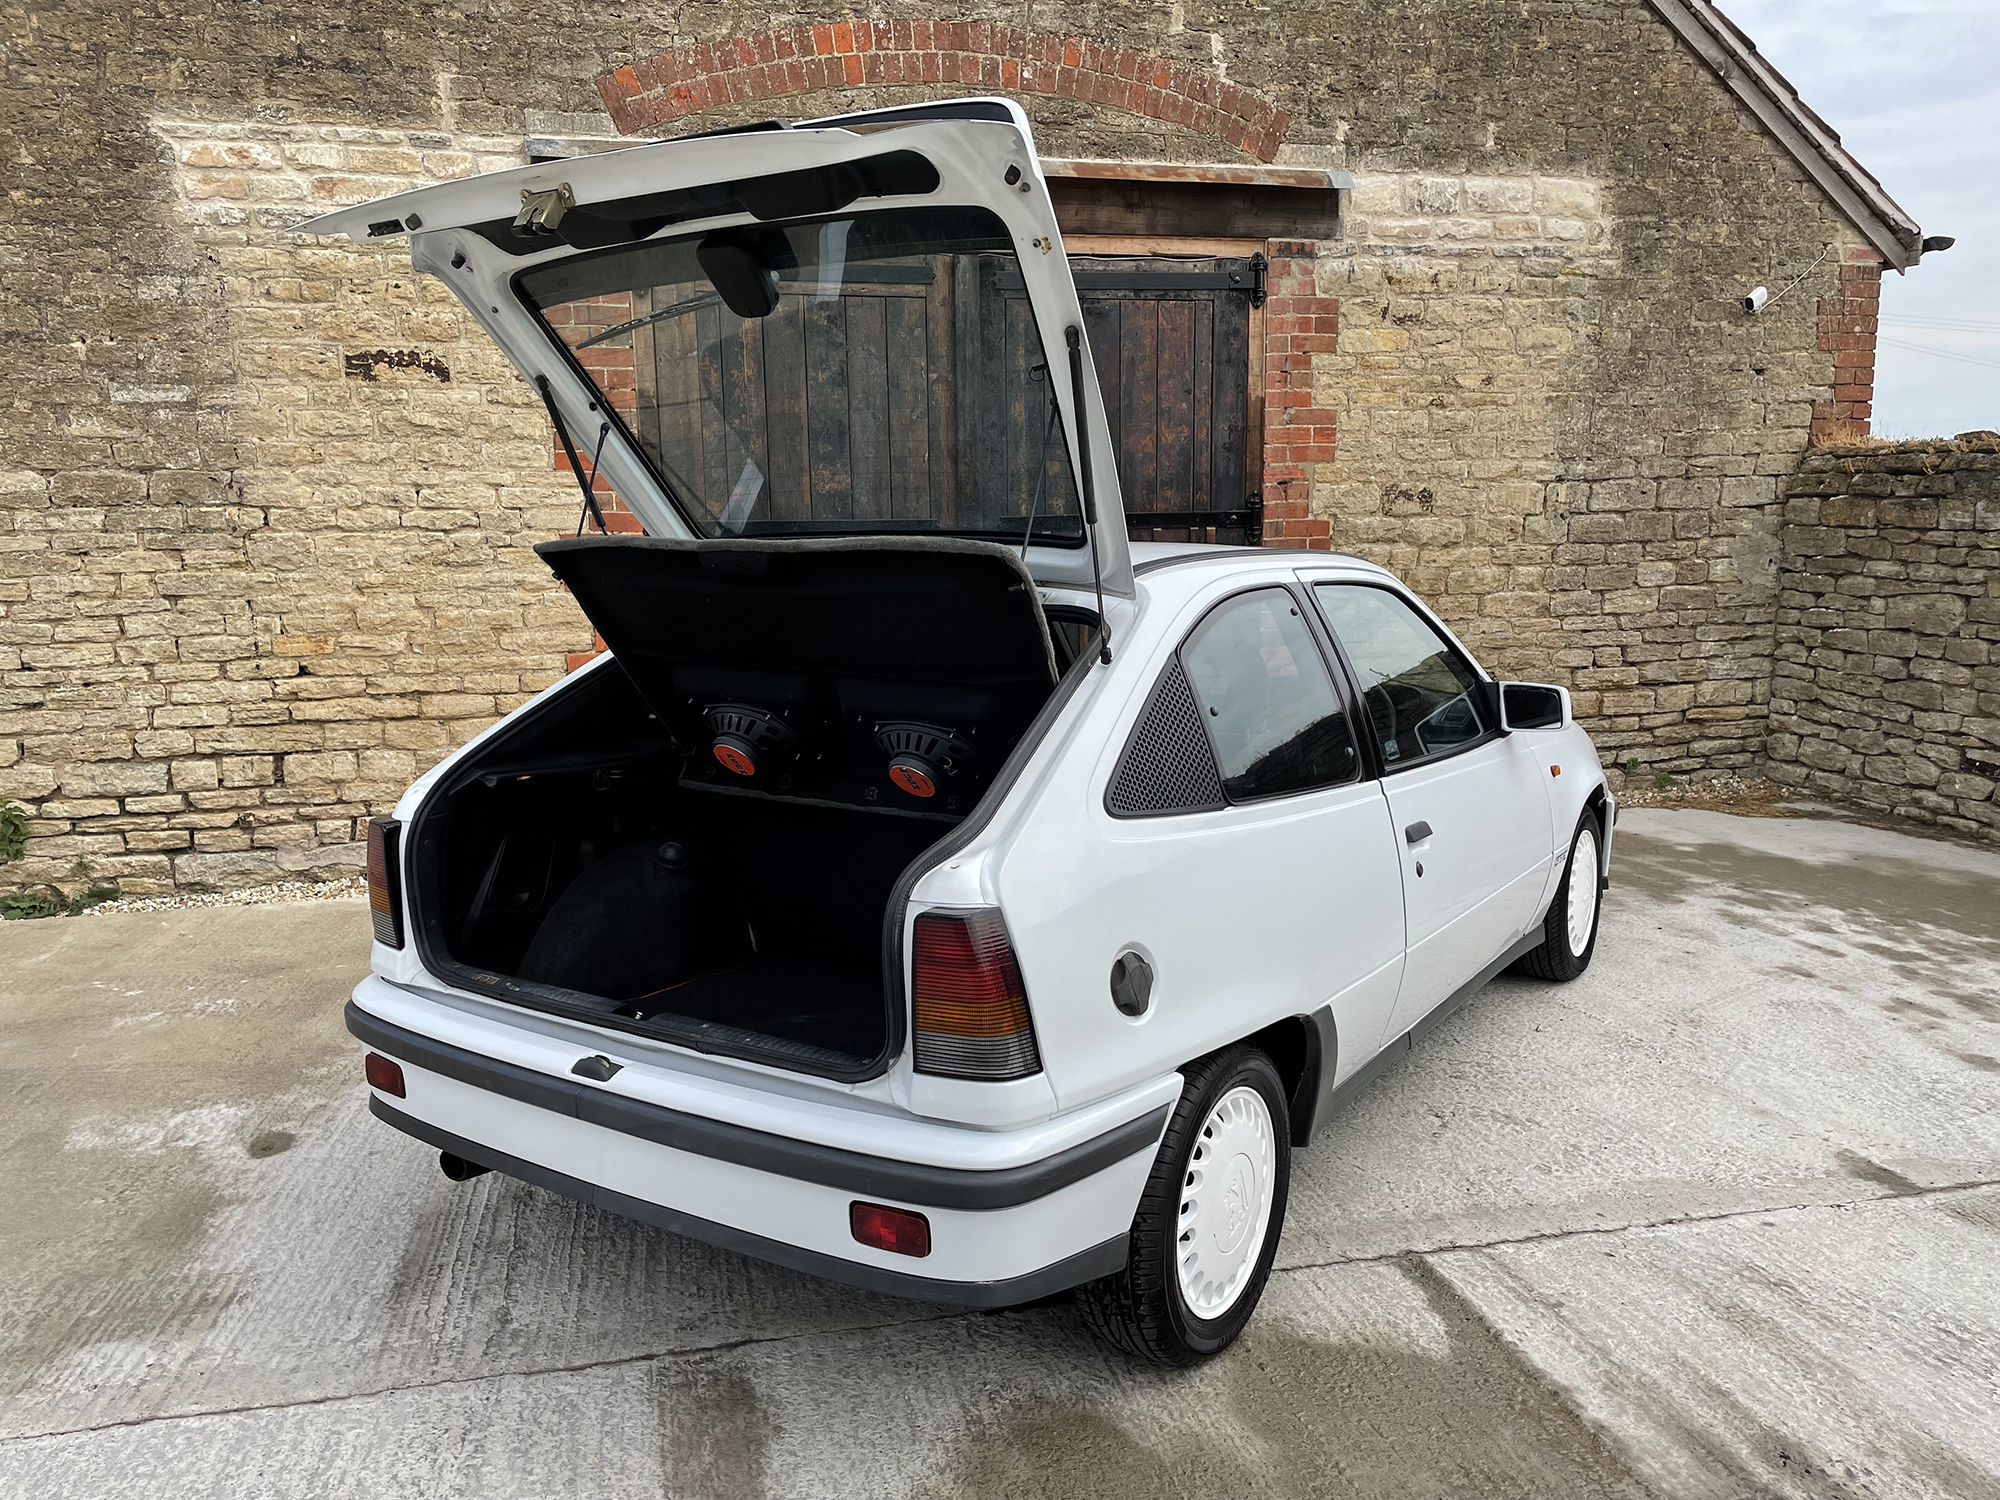 1989 Vauxhall Astra GTE 8V Reg. no. G78 JRP Chassis no. W0L000043LE112697 - Image 11 of 18